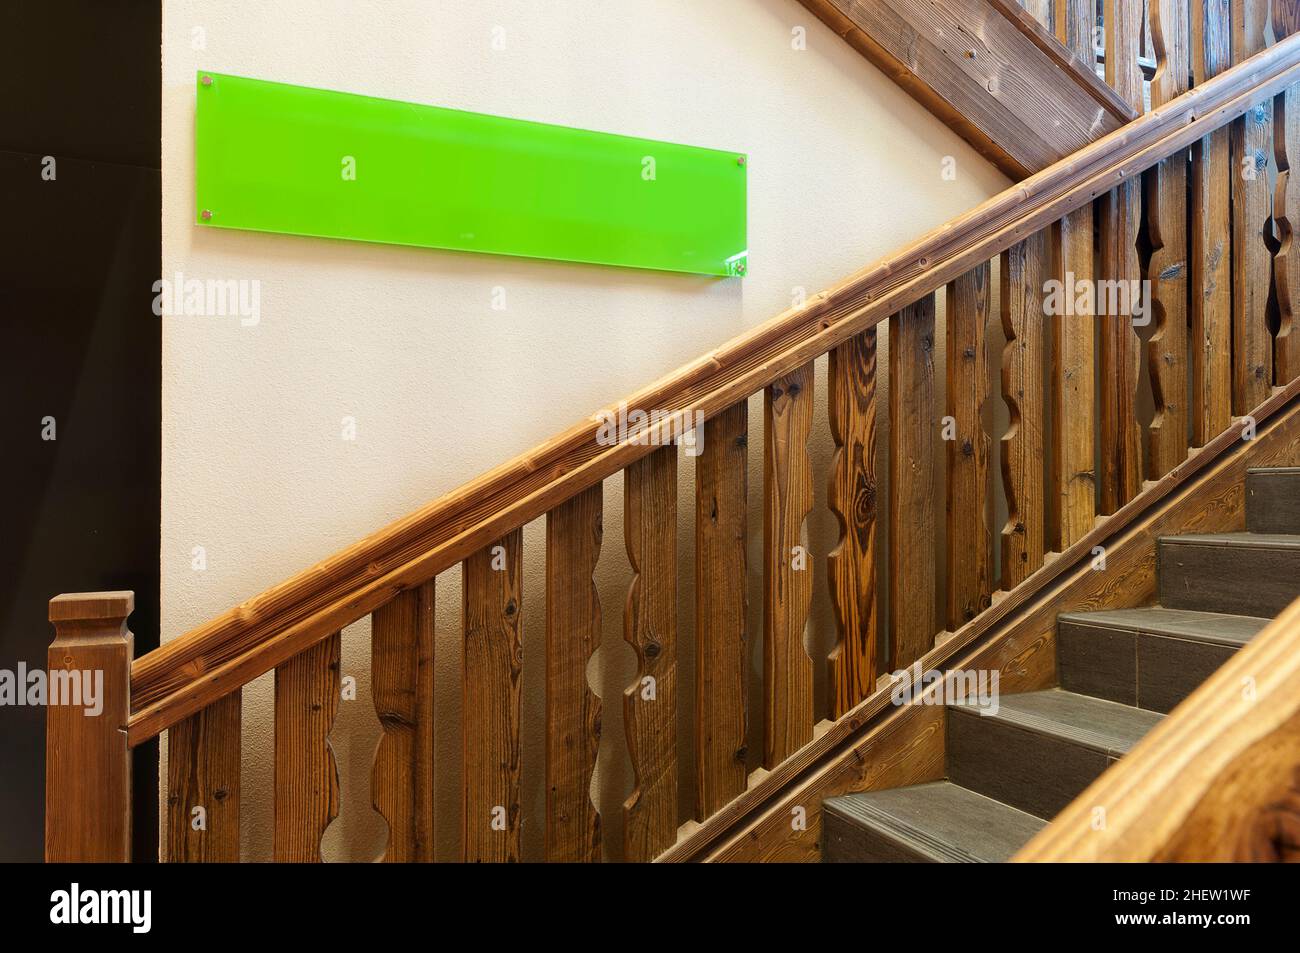 traditional wooden stairs with a big green sign you can label with your needs Stock Photo